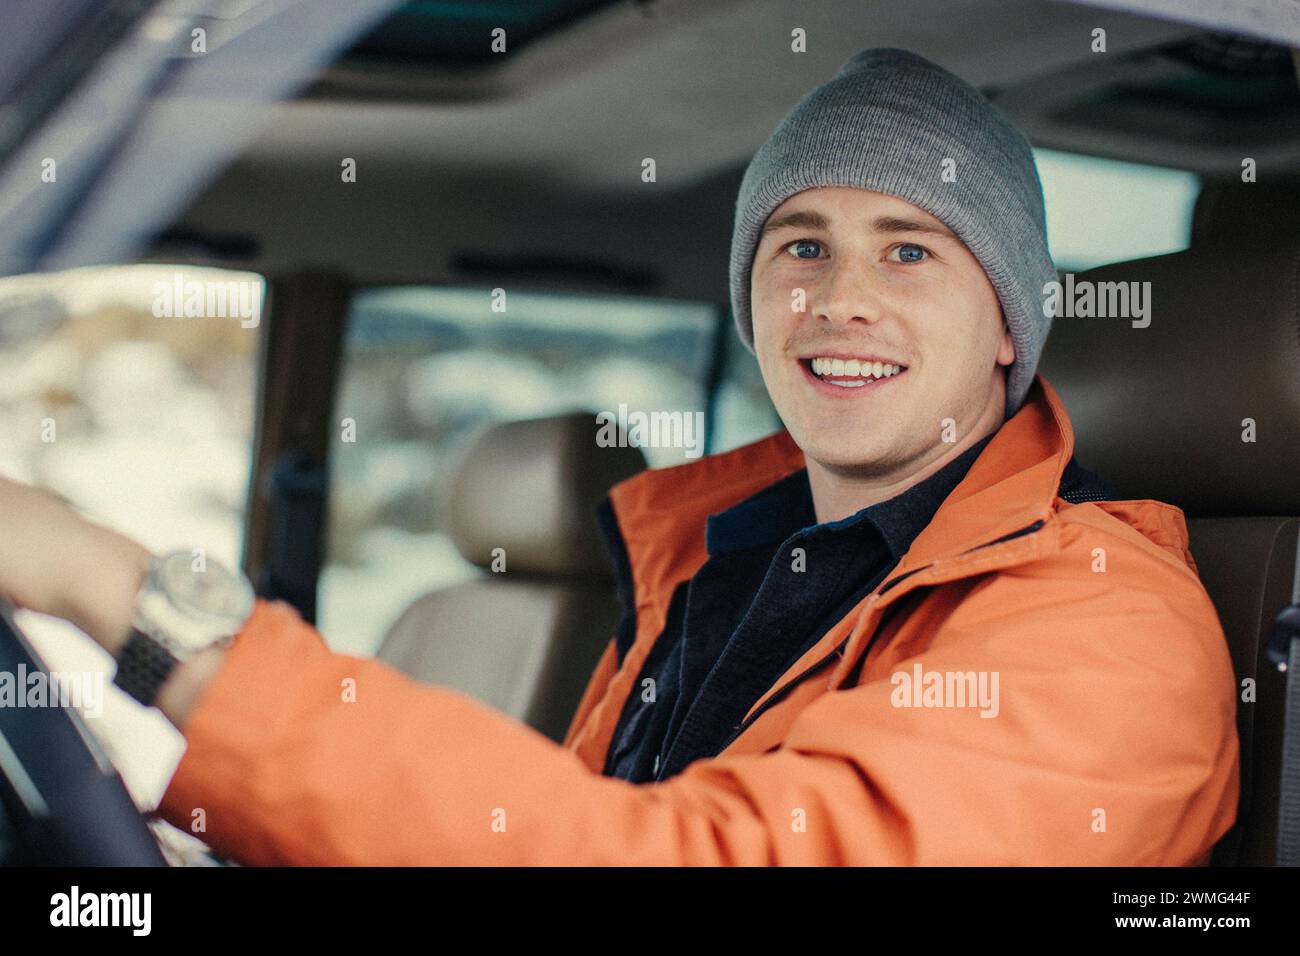 A Caucasian young male smiles while sitting inside a vehicle. Stock Photo